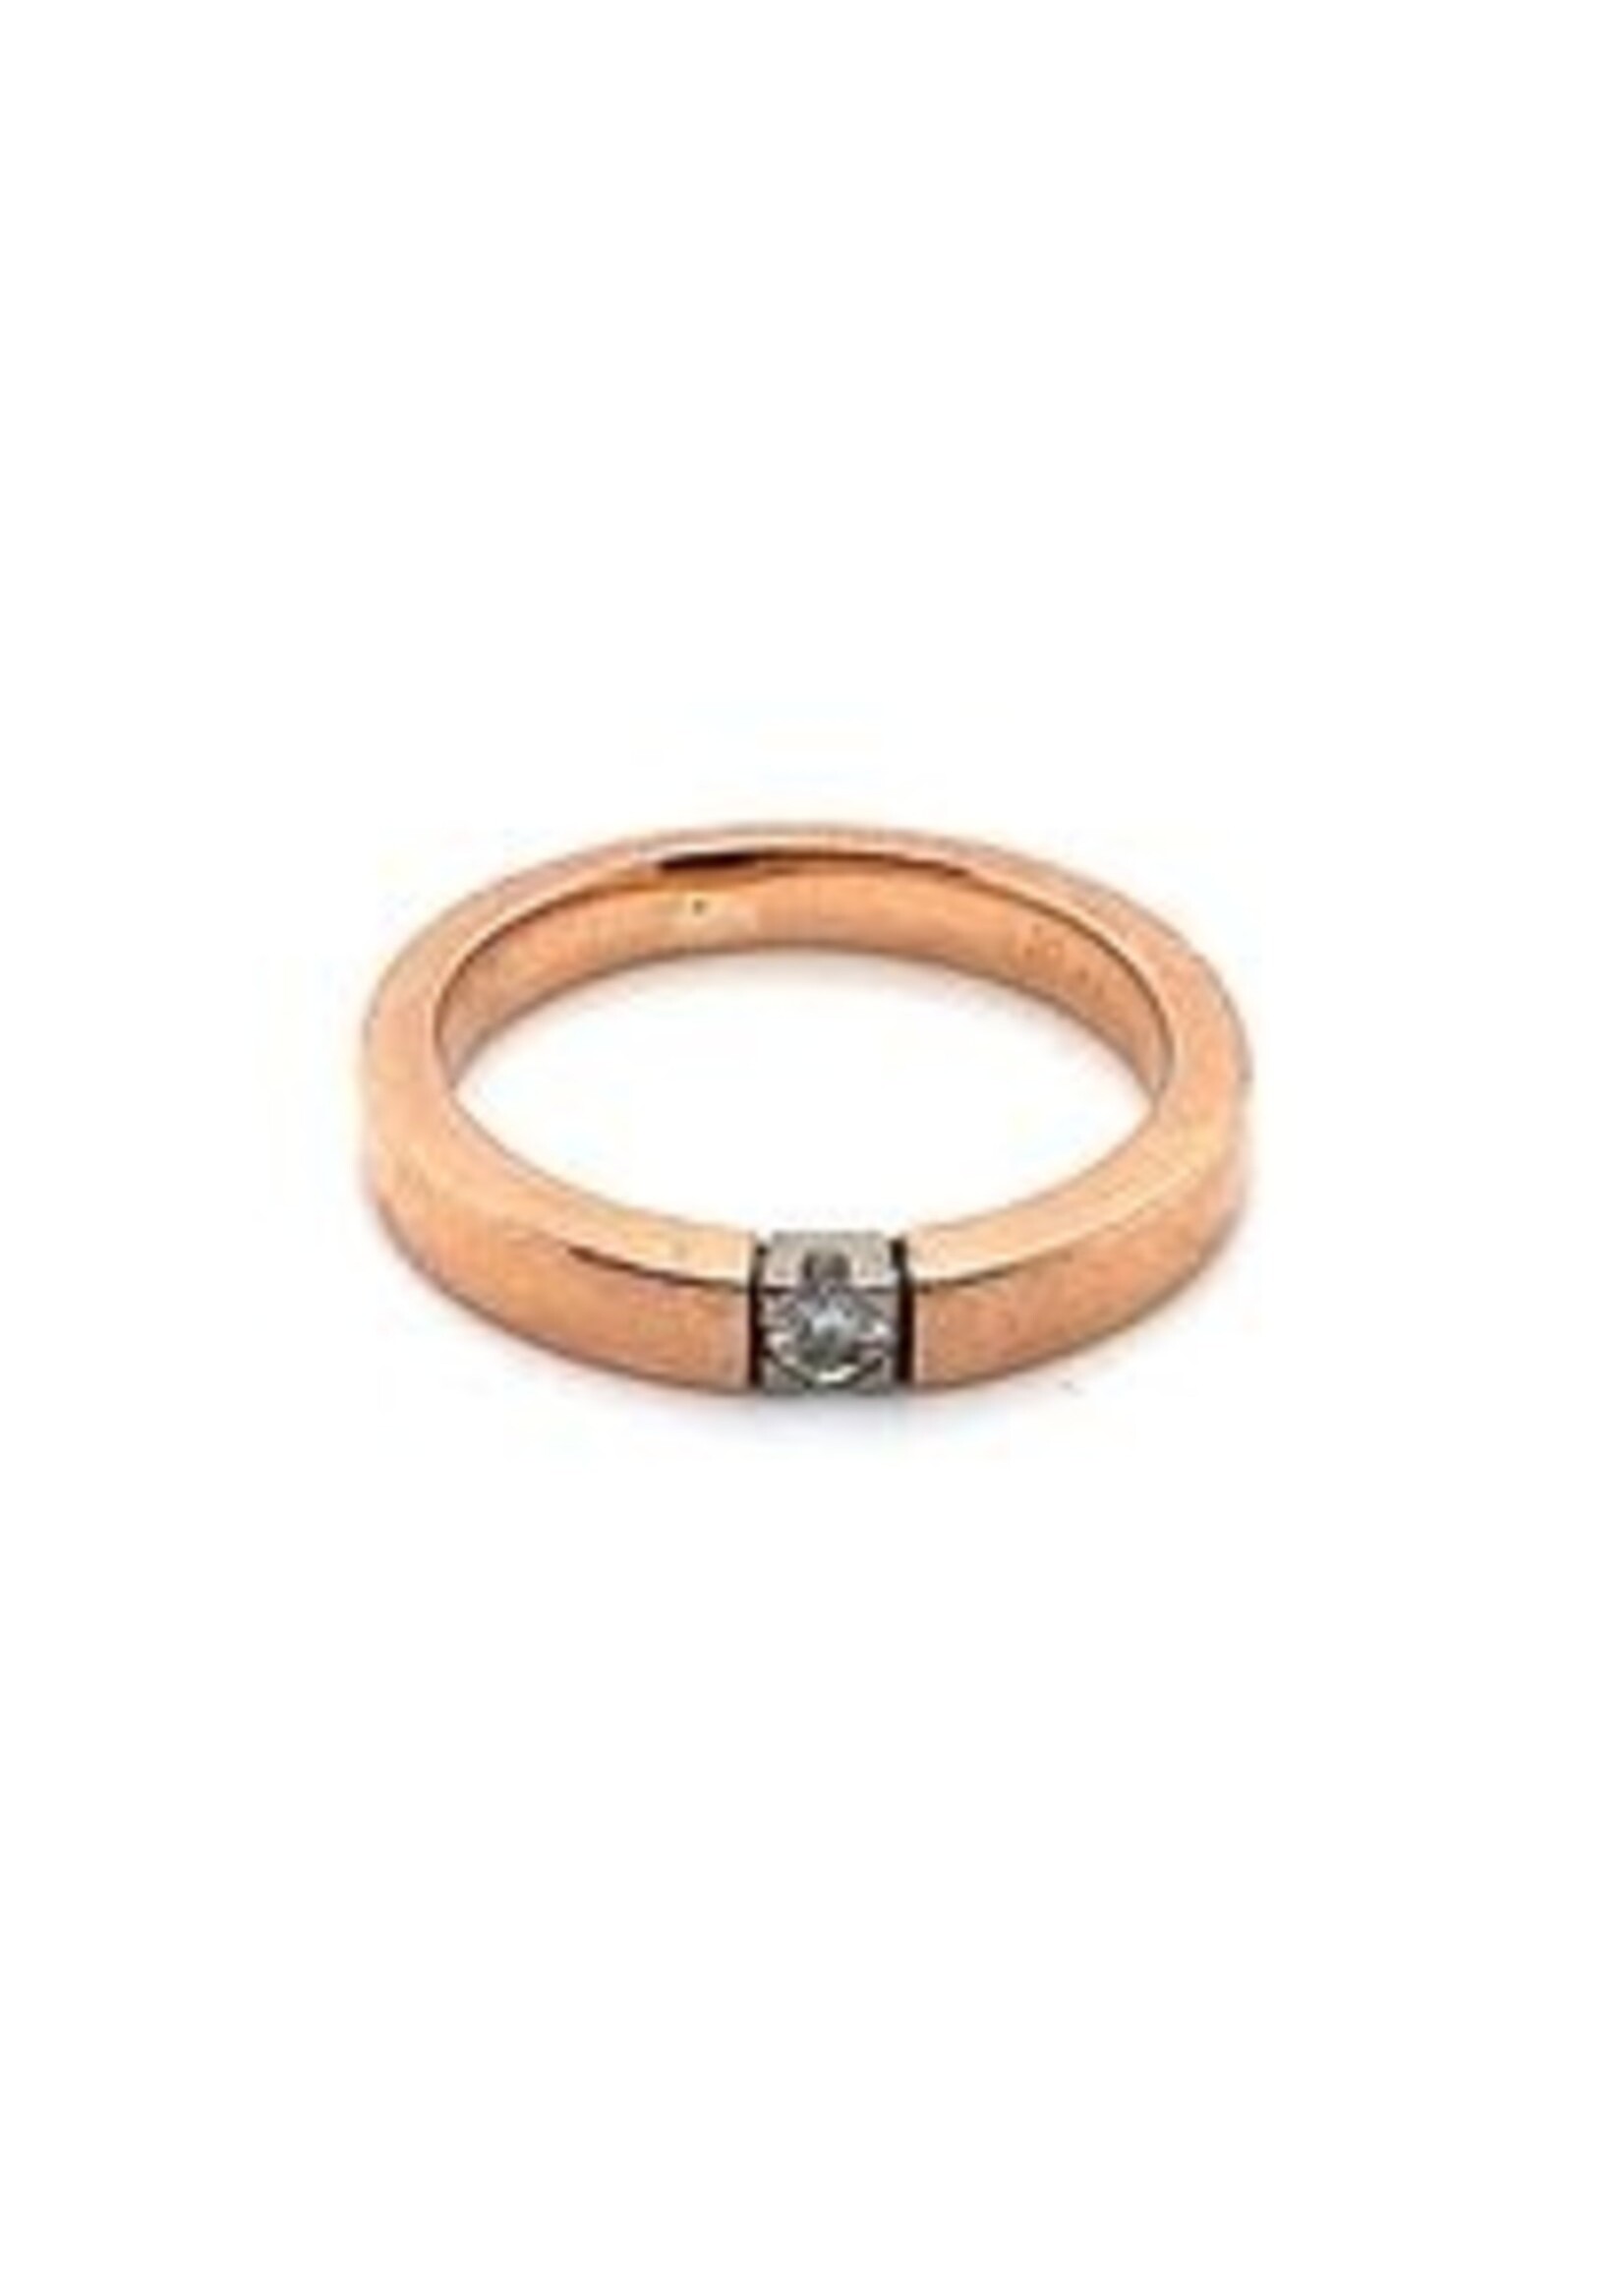 Vintage & Occasion Occasion roodgouden A.S. ring met diamant 0.05 in witgouden zetting